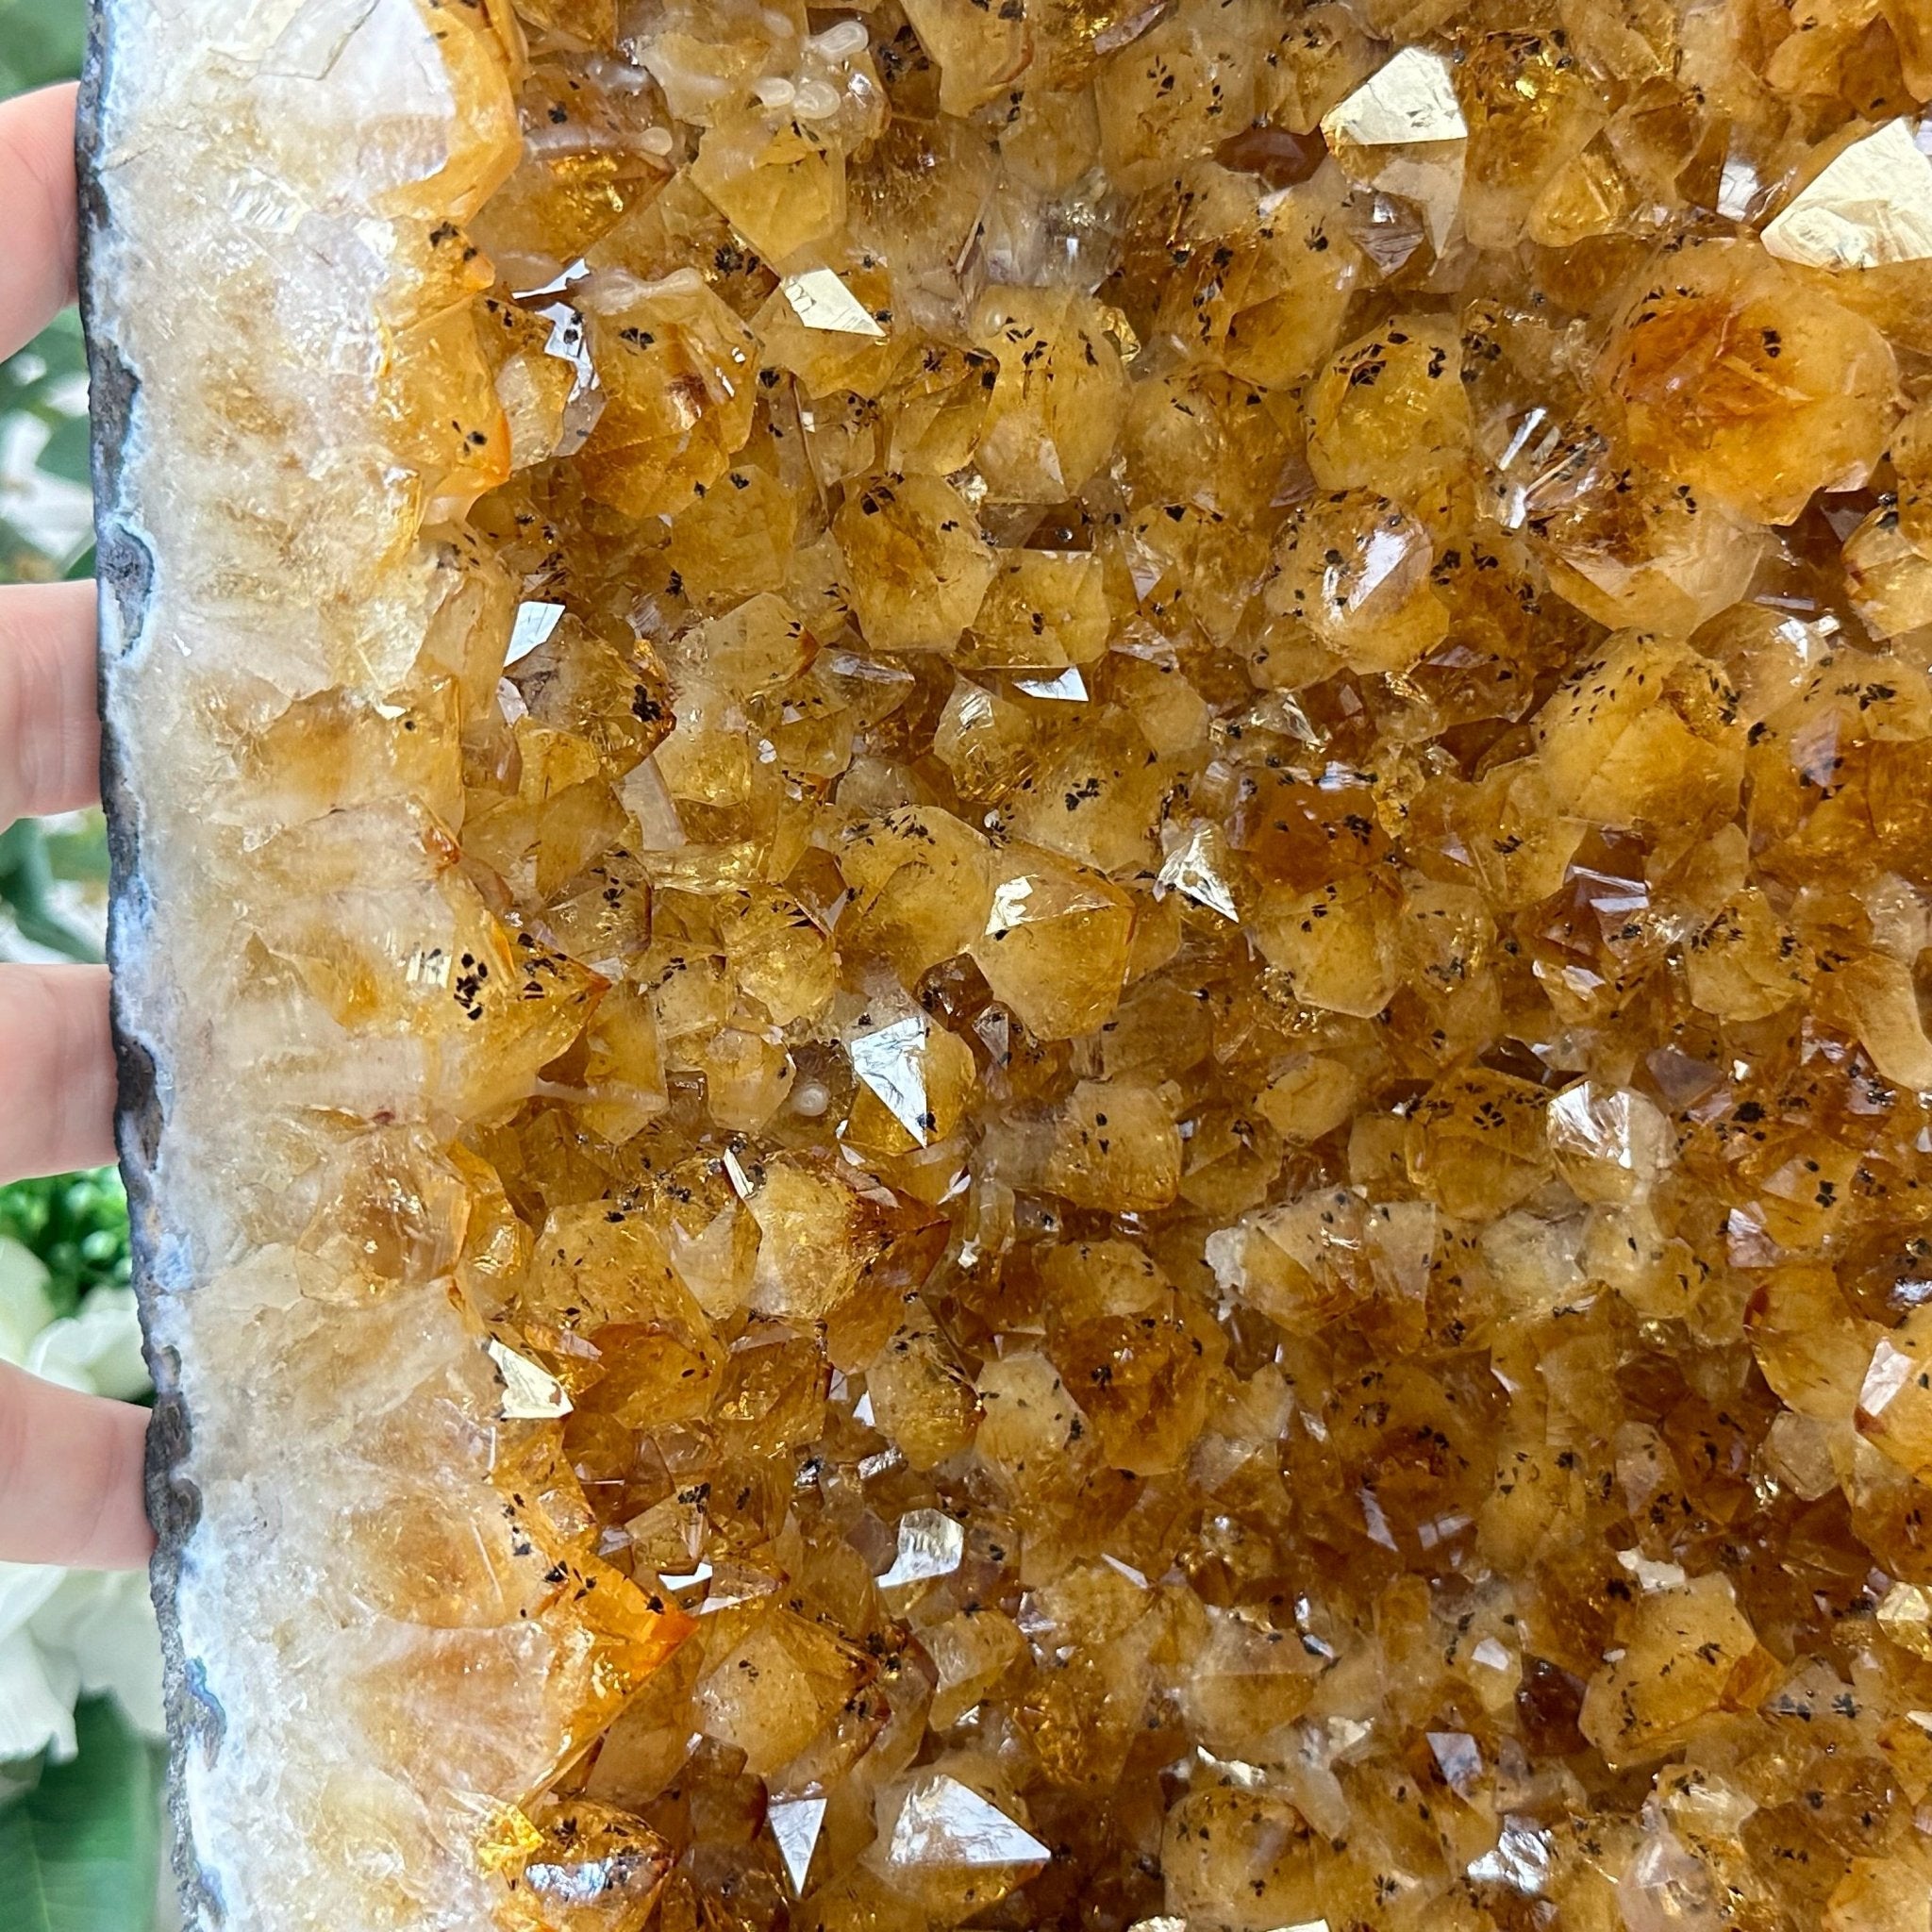 Extra Quality Citrine Cathedral, 71.4 lbs & 19.8" Tall #5603-0293 by Brazil Gems® - Brazil GemsBrazil GemsExtra Quality Citrine Cathedral, 71.4 lbs & 19.8" Tall #5603-0293 by Brazil Gems®Cathedrals5603-0293